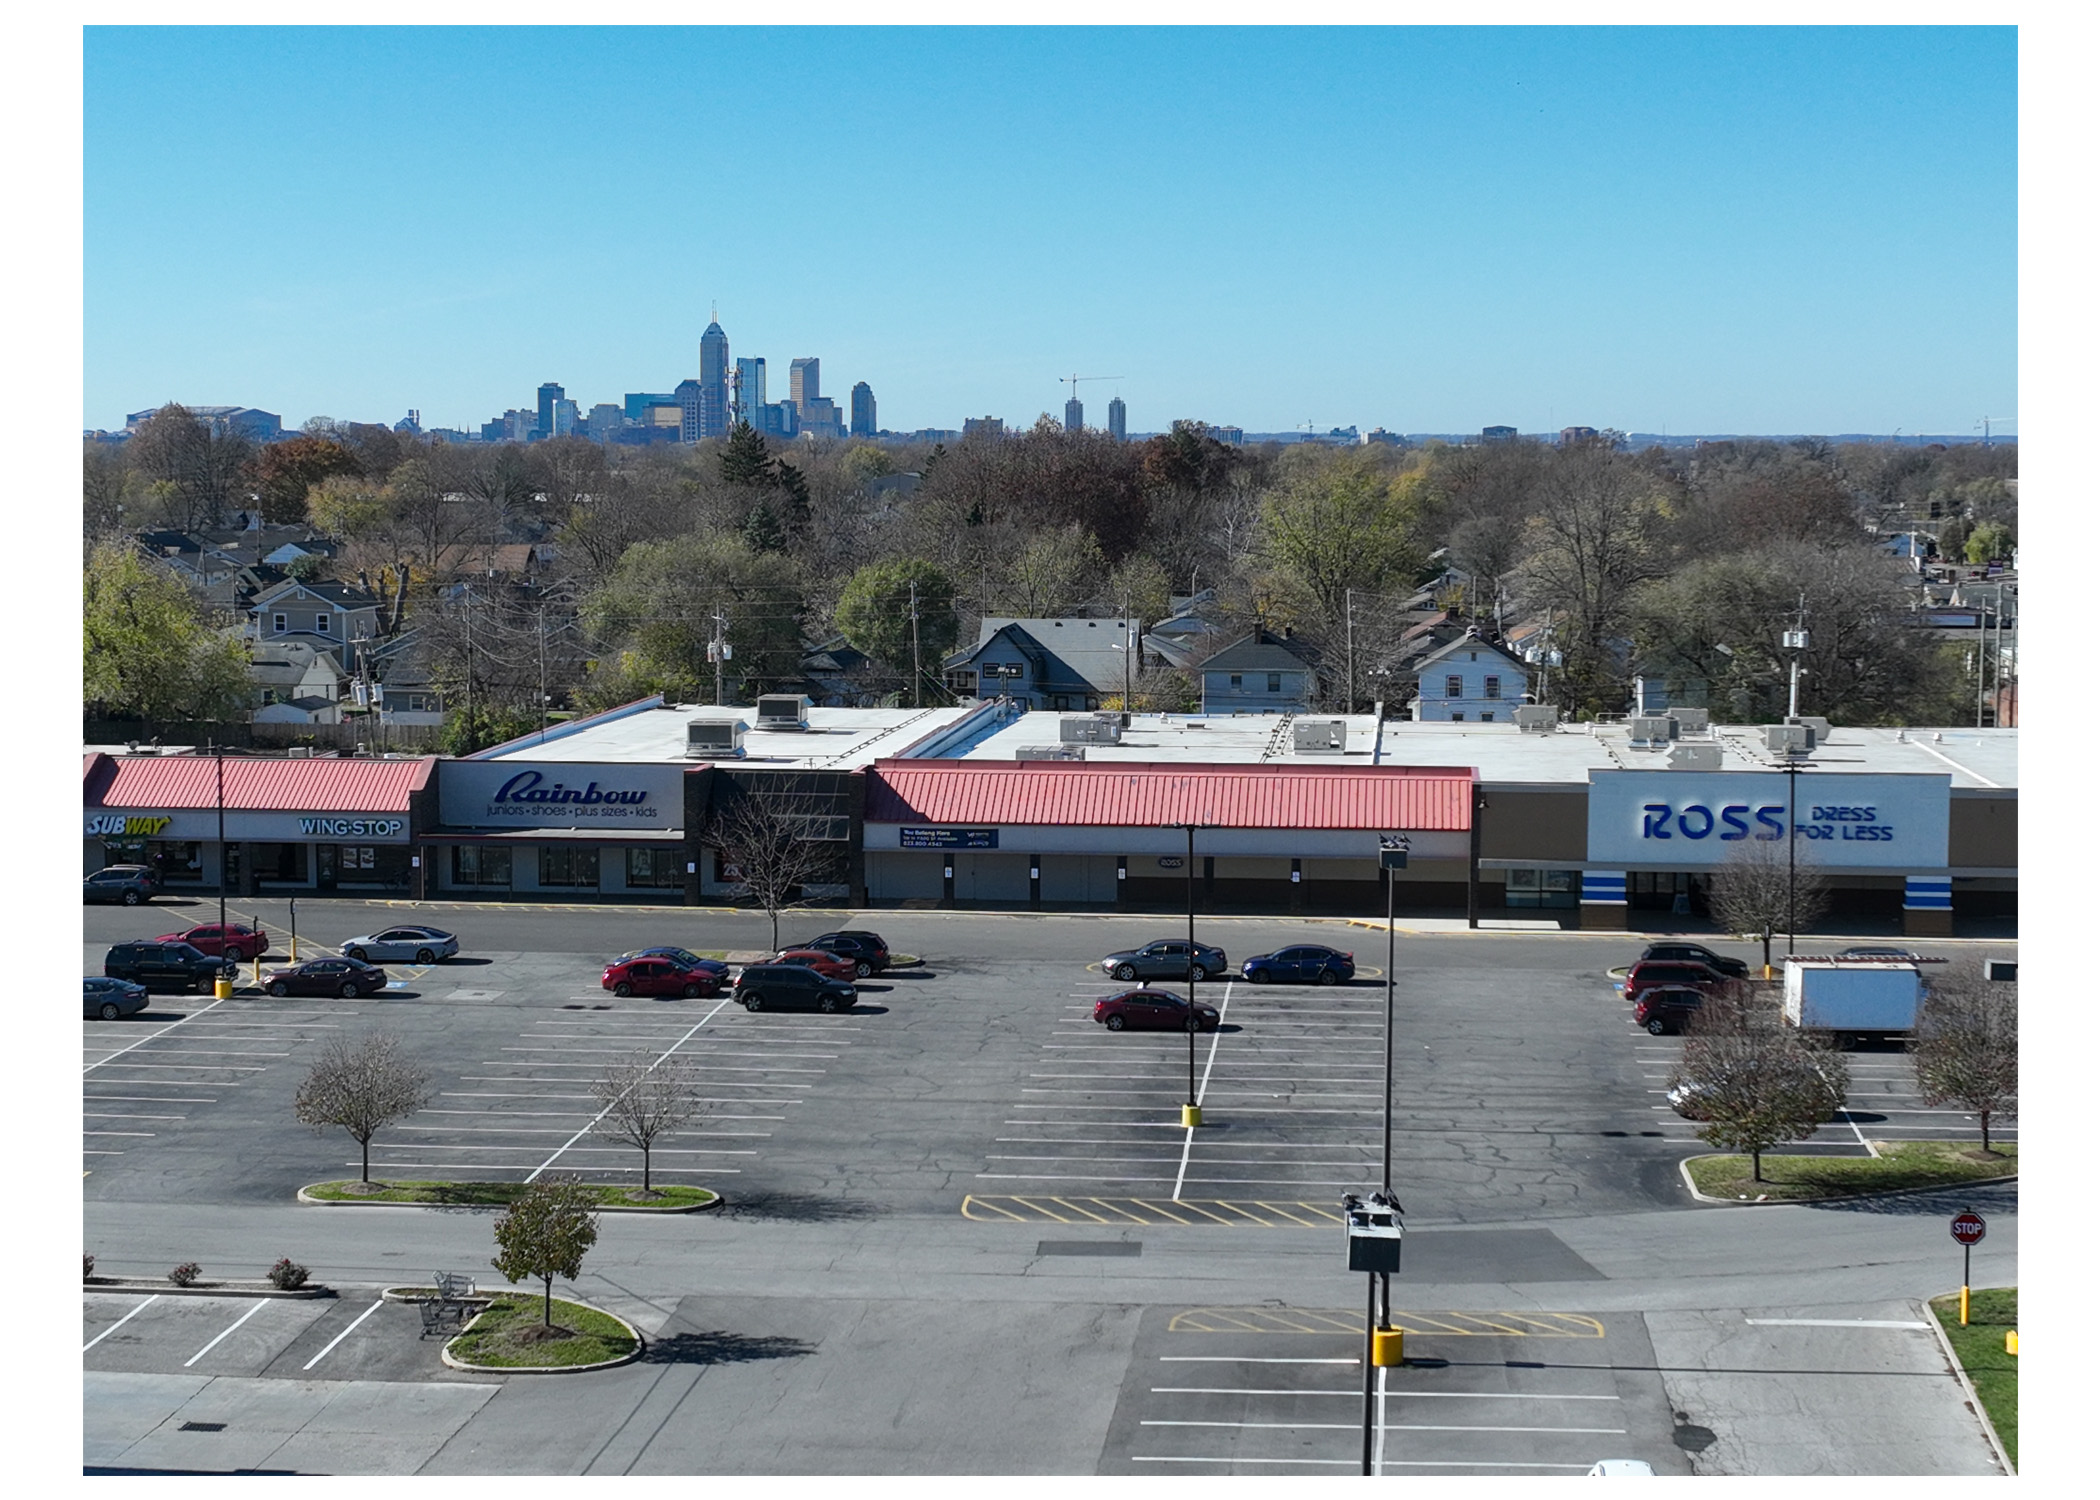 Linwood Square, Subway, Wing Stop, Rainbow, Ross Dress For Less, and parking lot. Aerial view, downtown Indianapolis skyline behind stores.